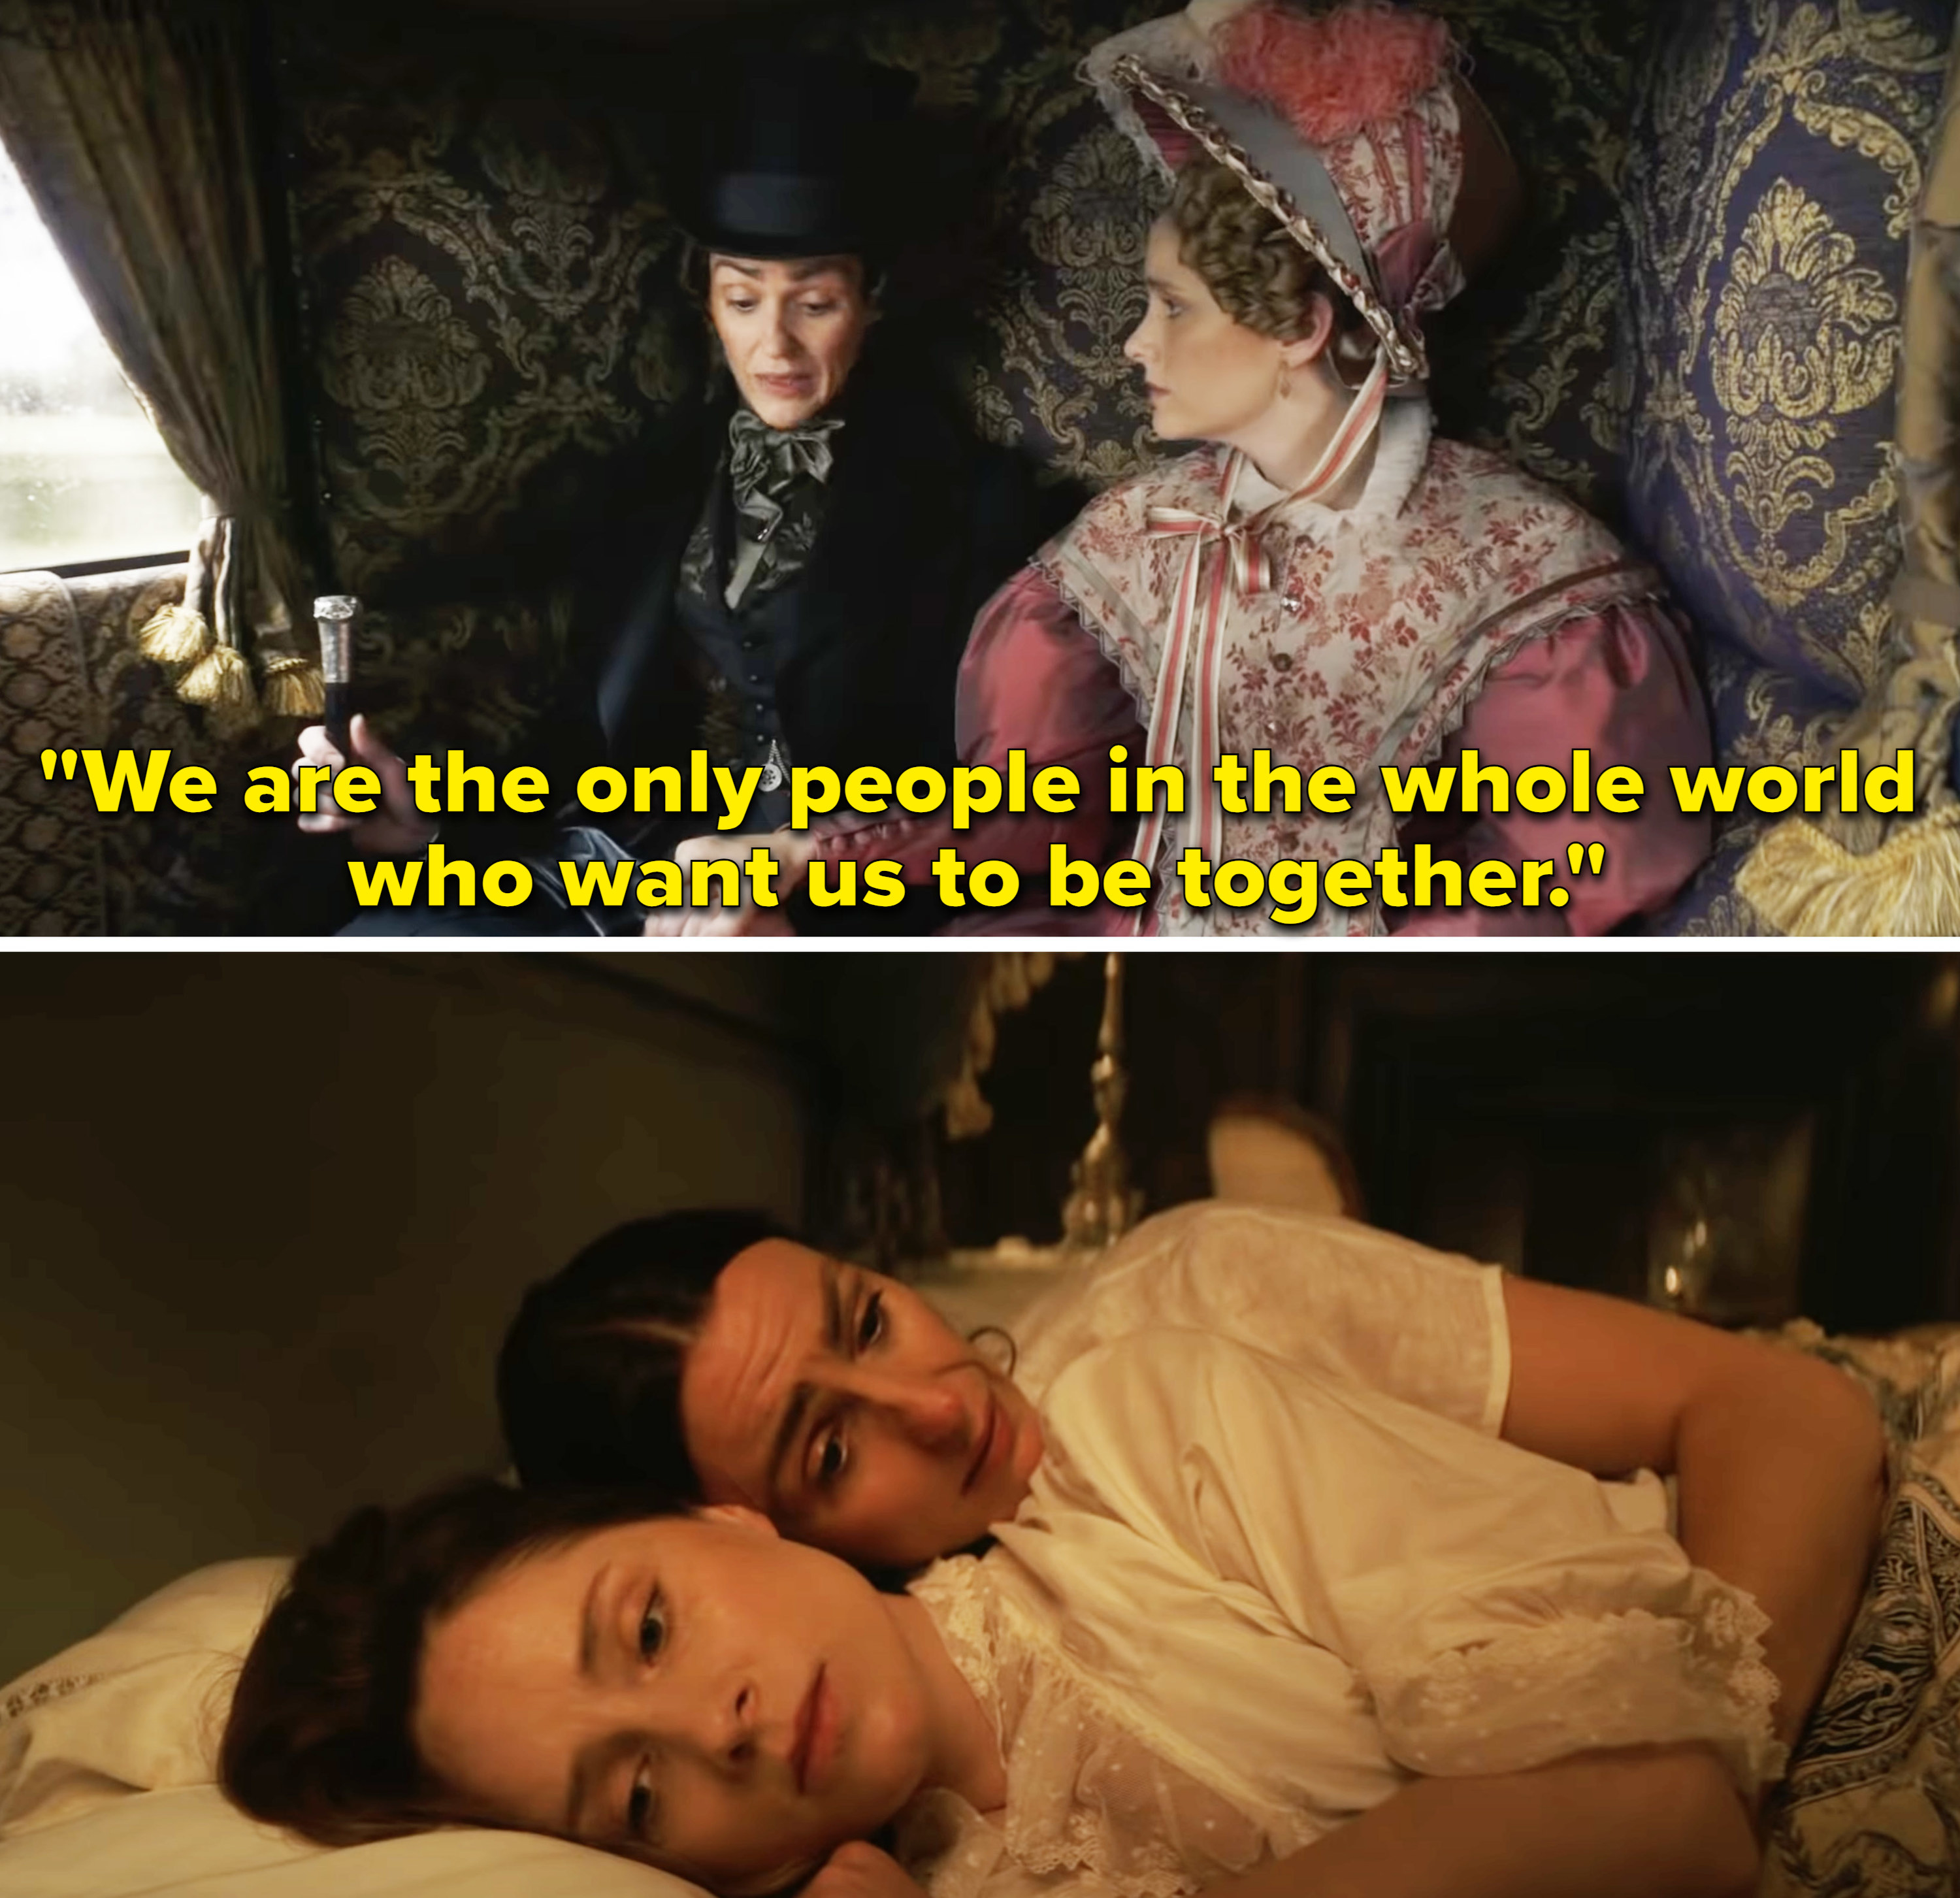 Anne telling Ann, &quot;We are the only people in the whole world who want us to be together&quot;